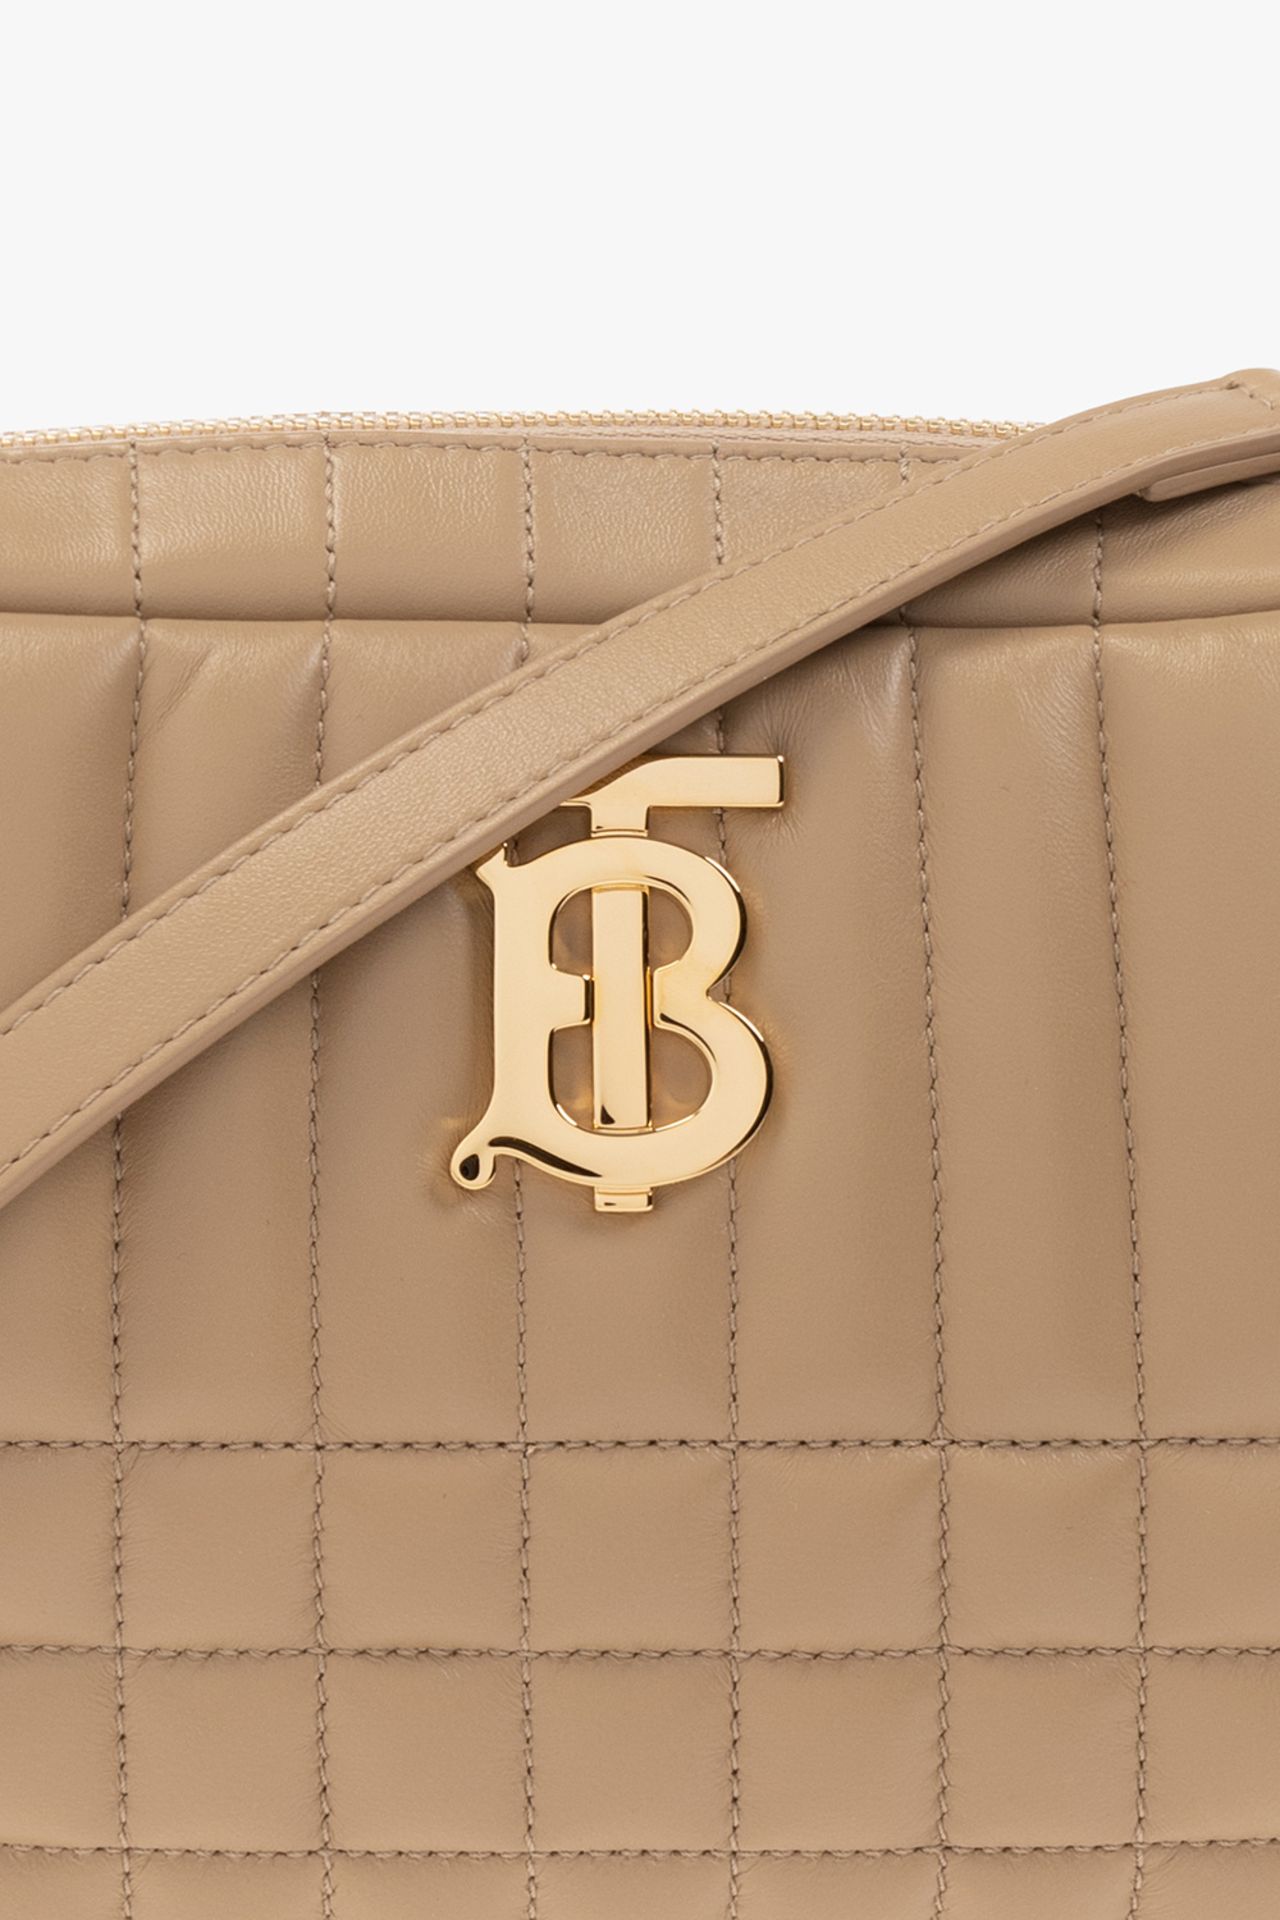 (No Vat) Burberry tb soft crossbody bag camel with Gold. Approx 23x12cm. - Image 2 of 7